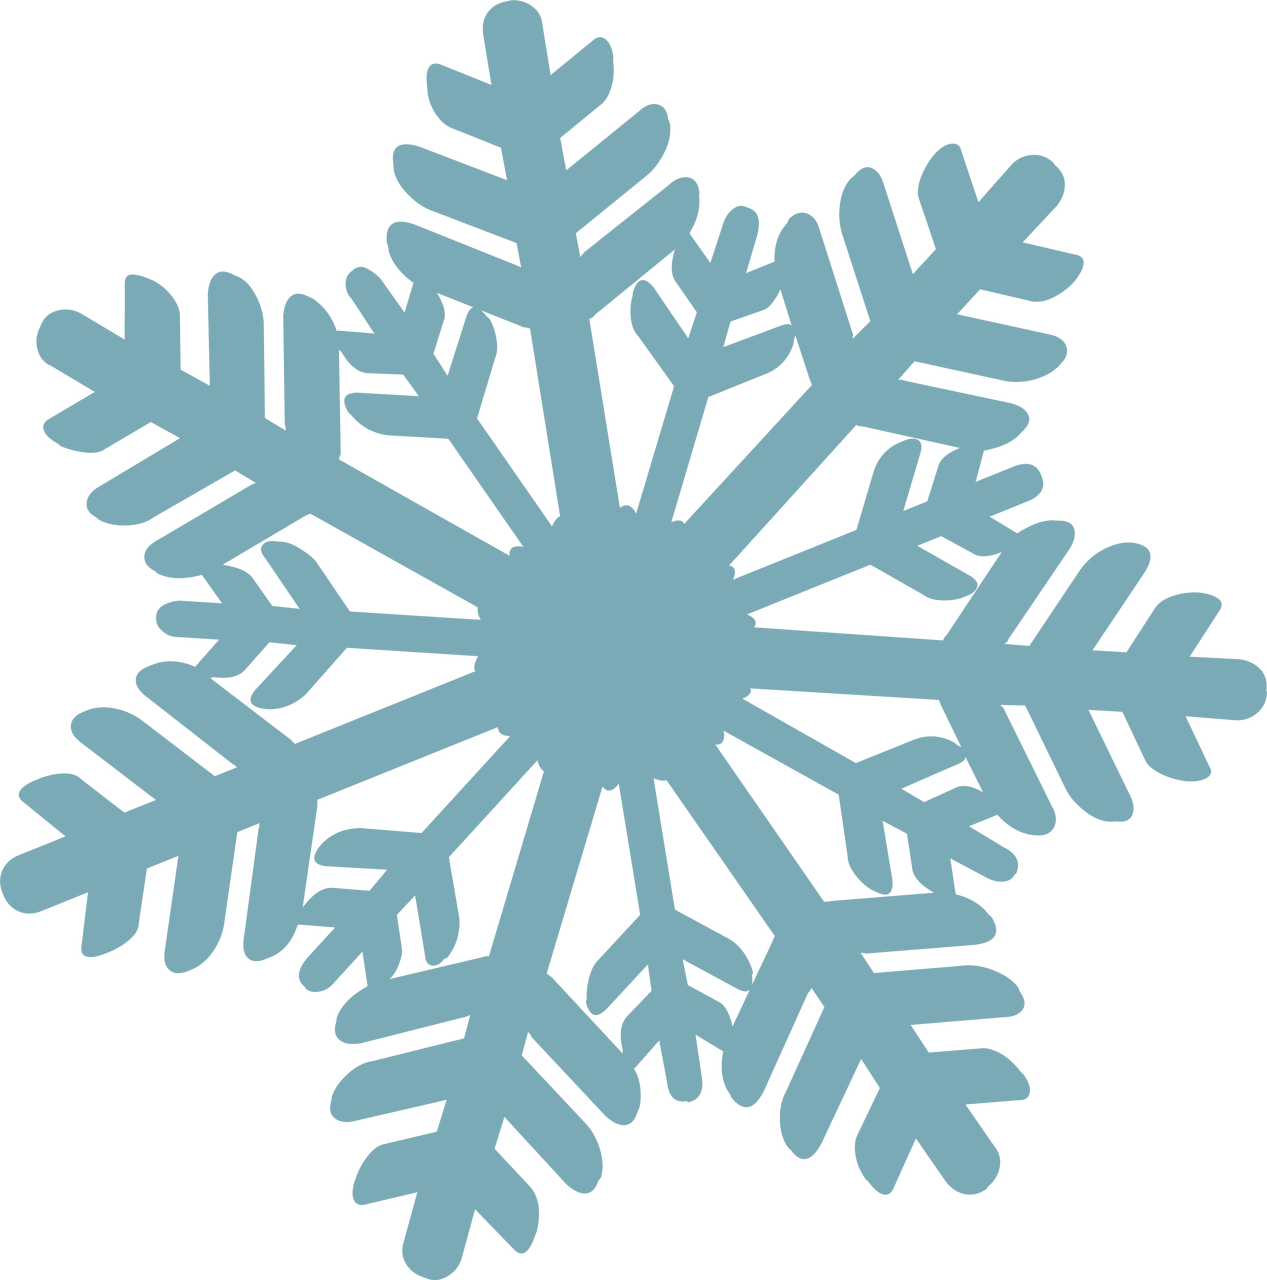 Download Snowflake #12 SVG Cut File - Snap Click Supply Co.